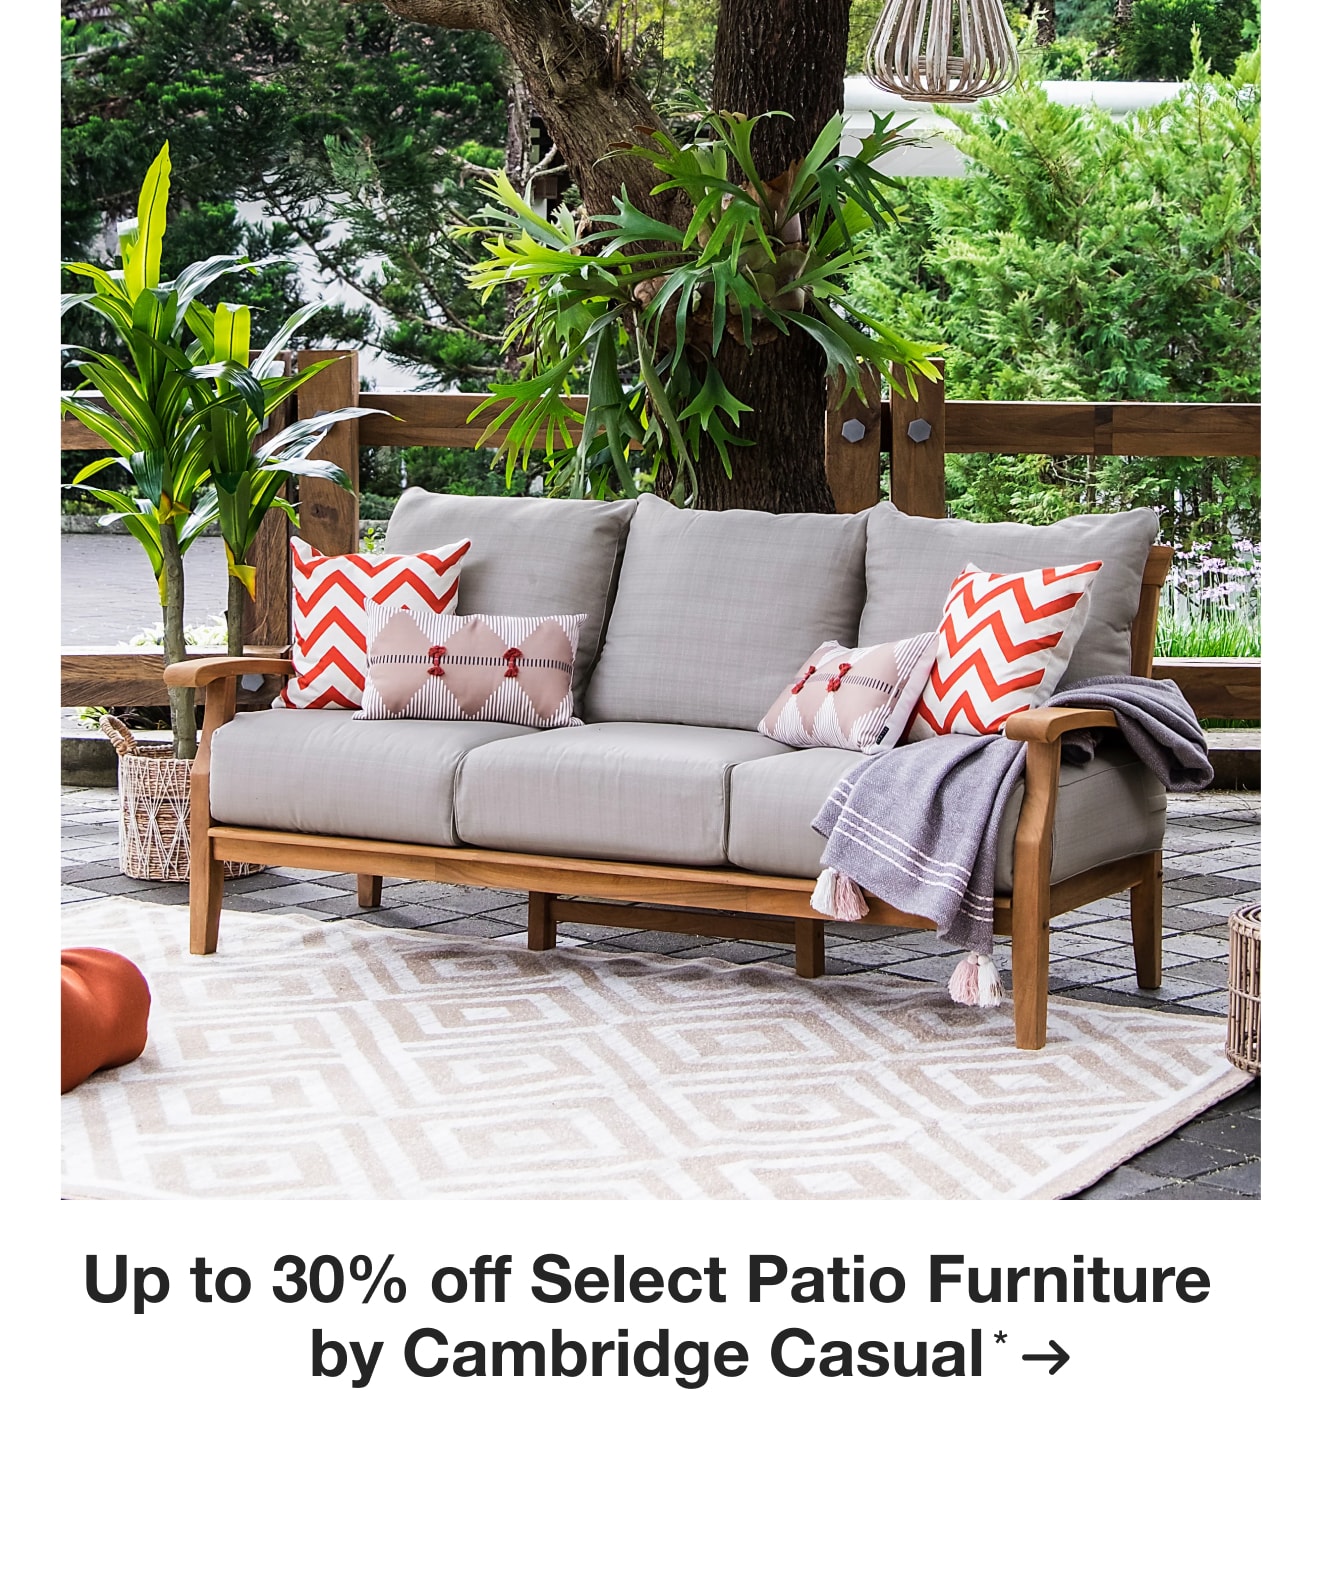 Up to 30% off Select Patio Furniture by Cambridge Casual*